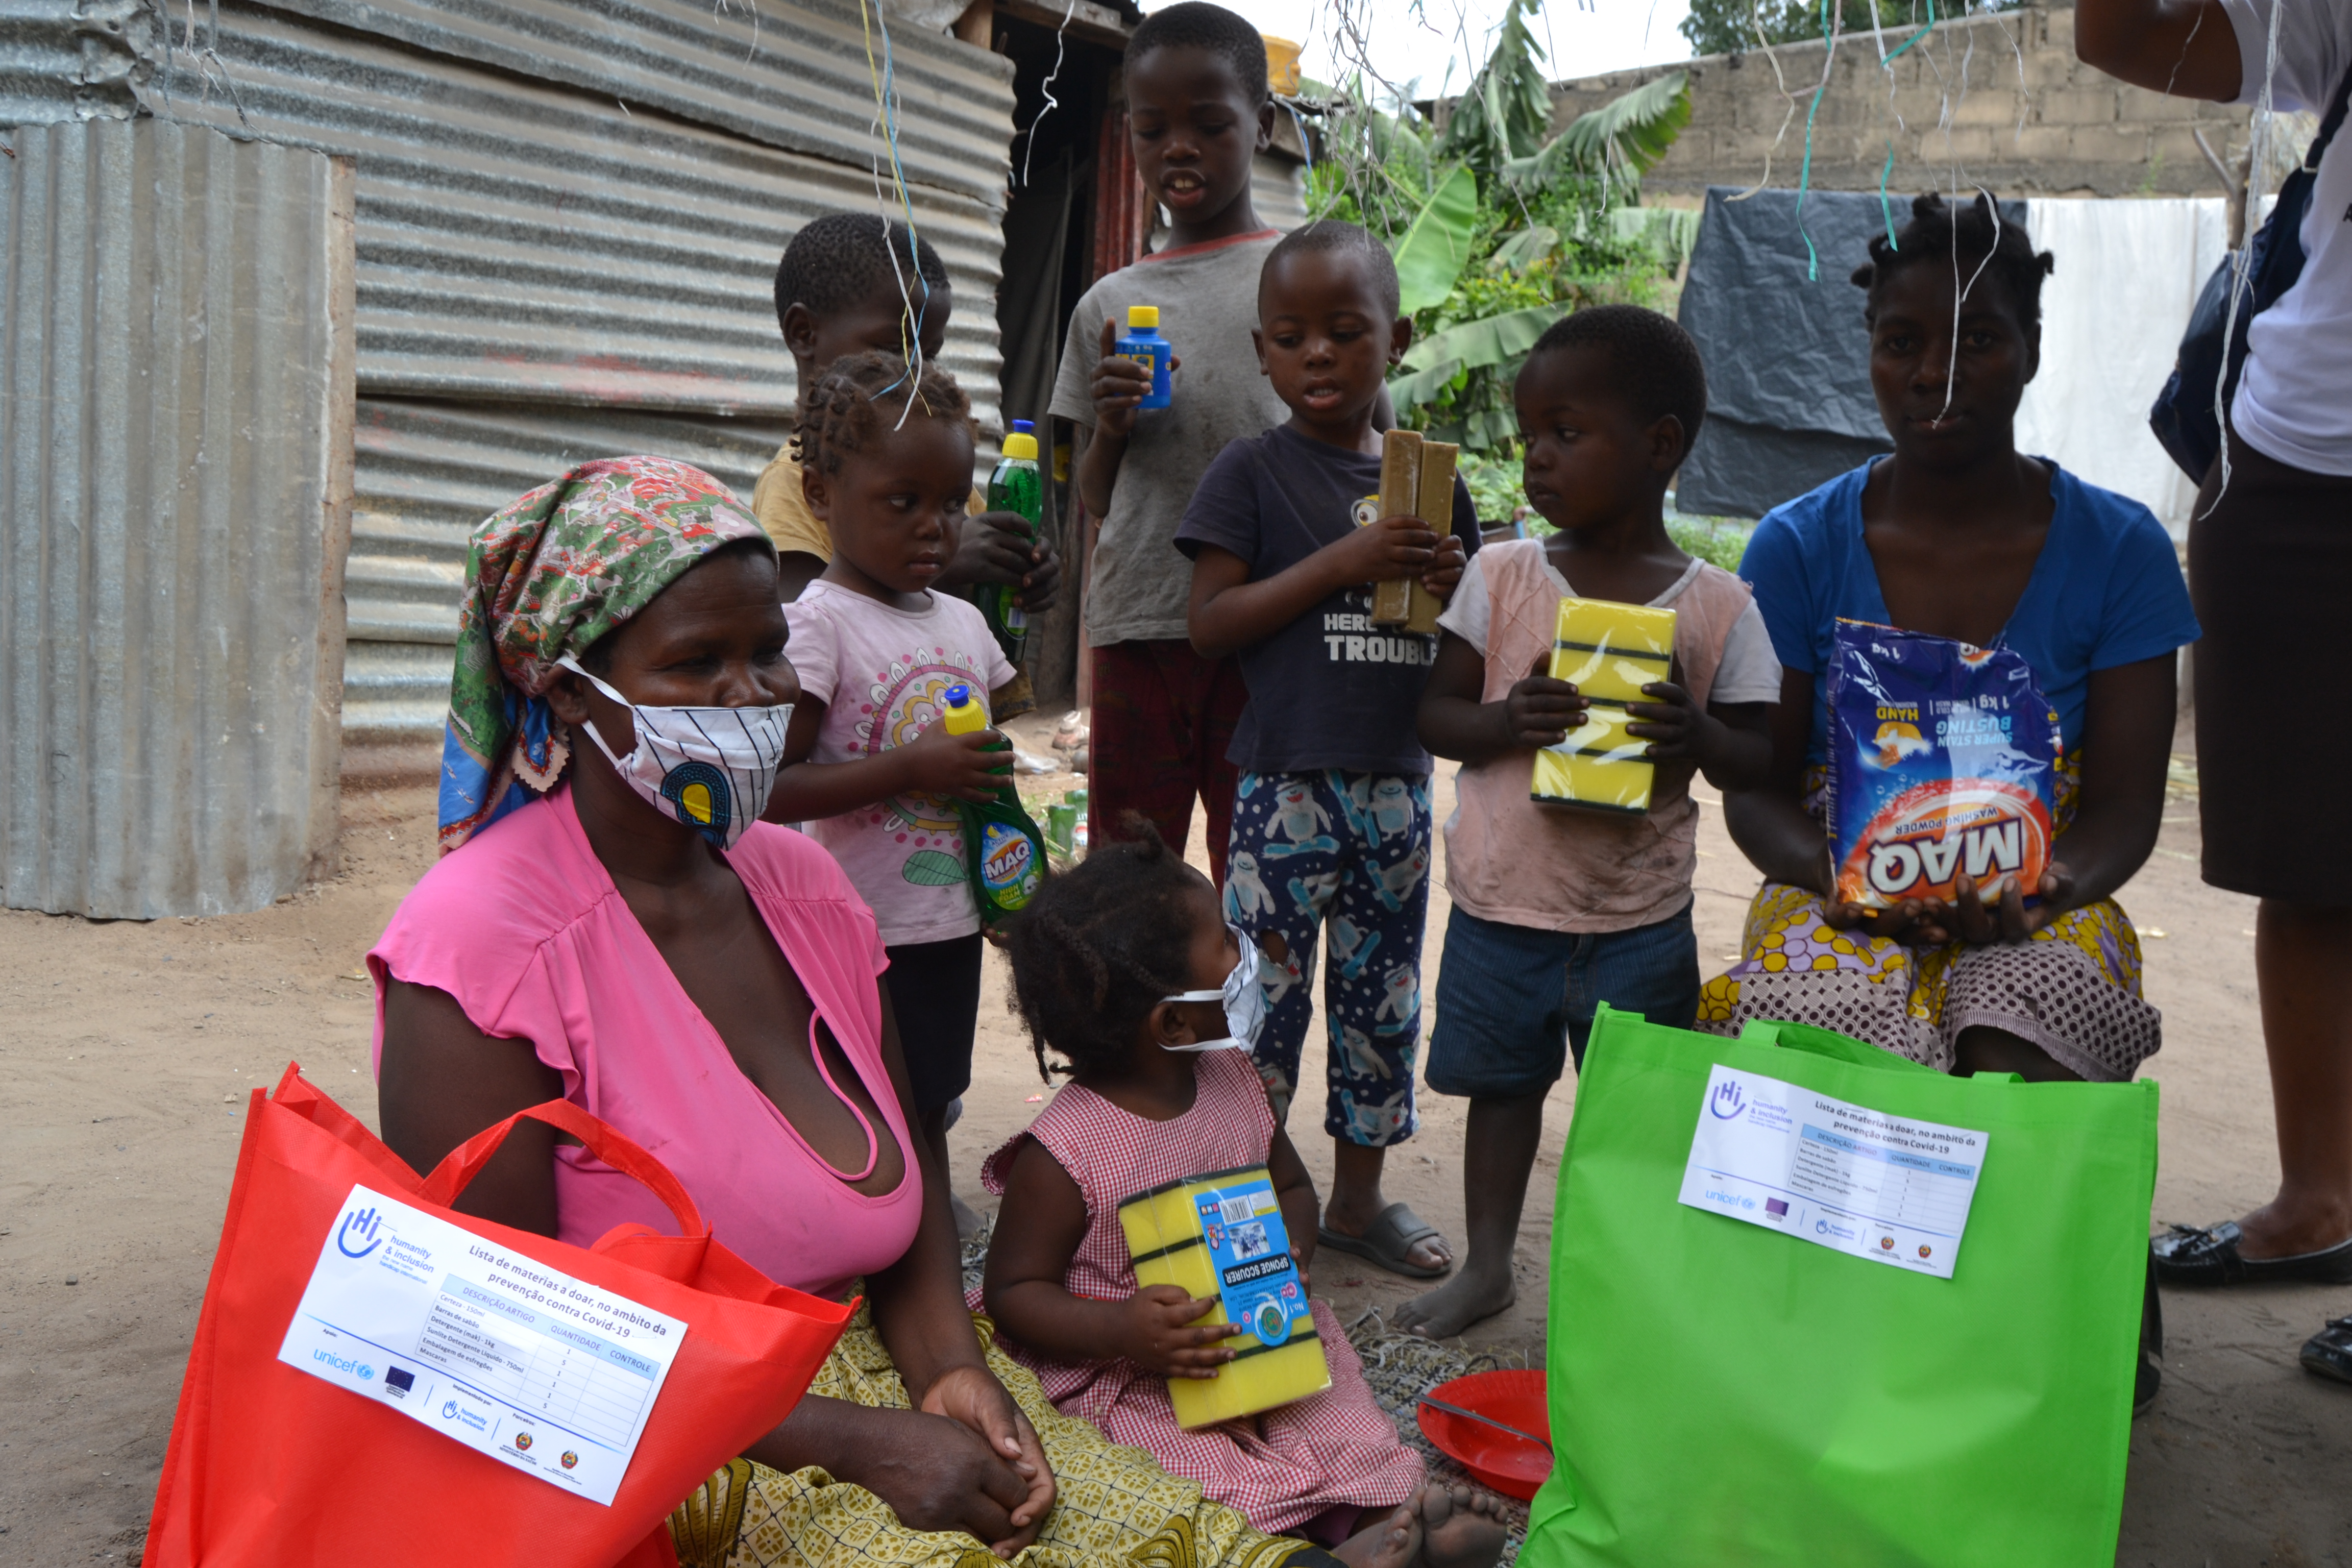 HI did the distribution of hygiene kits and organized awareness sessions in Maputo and Matola about 